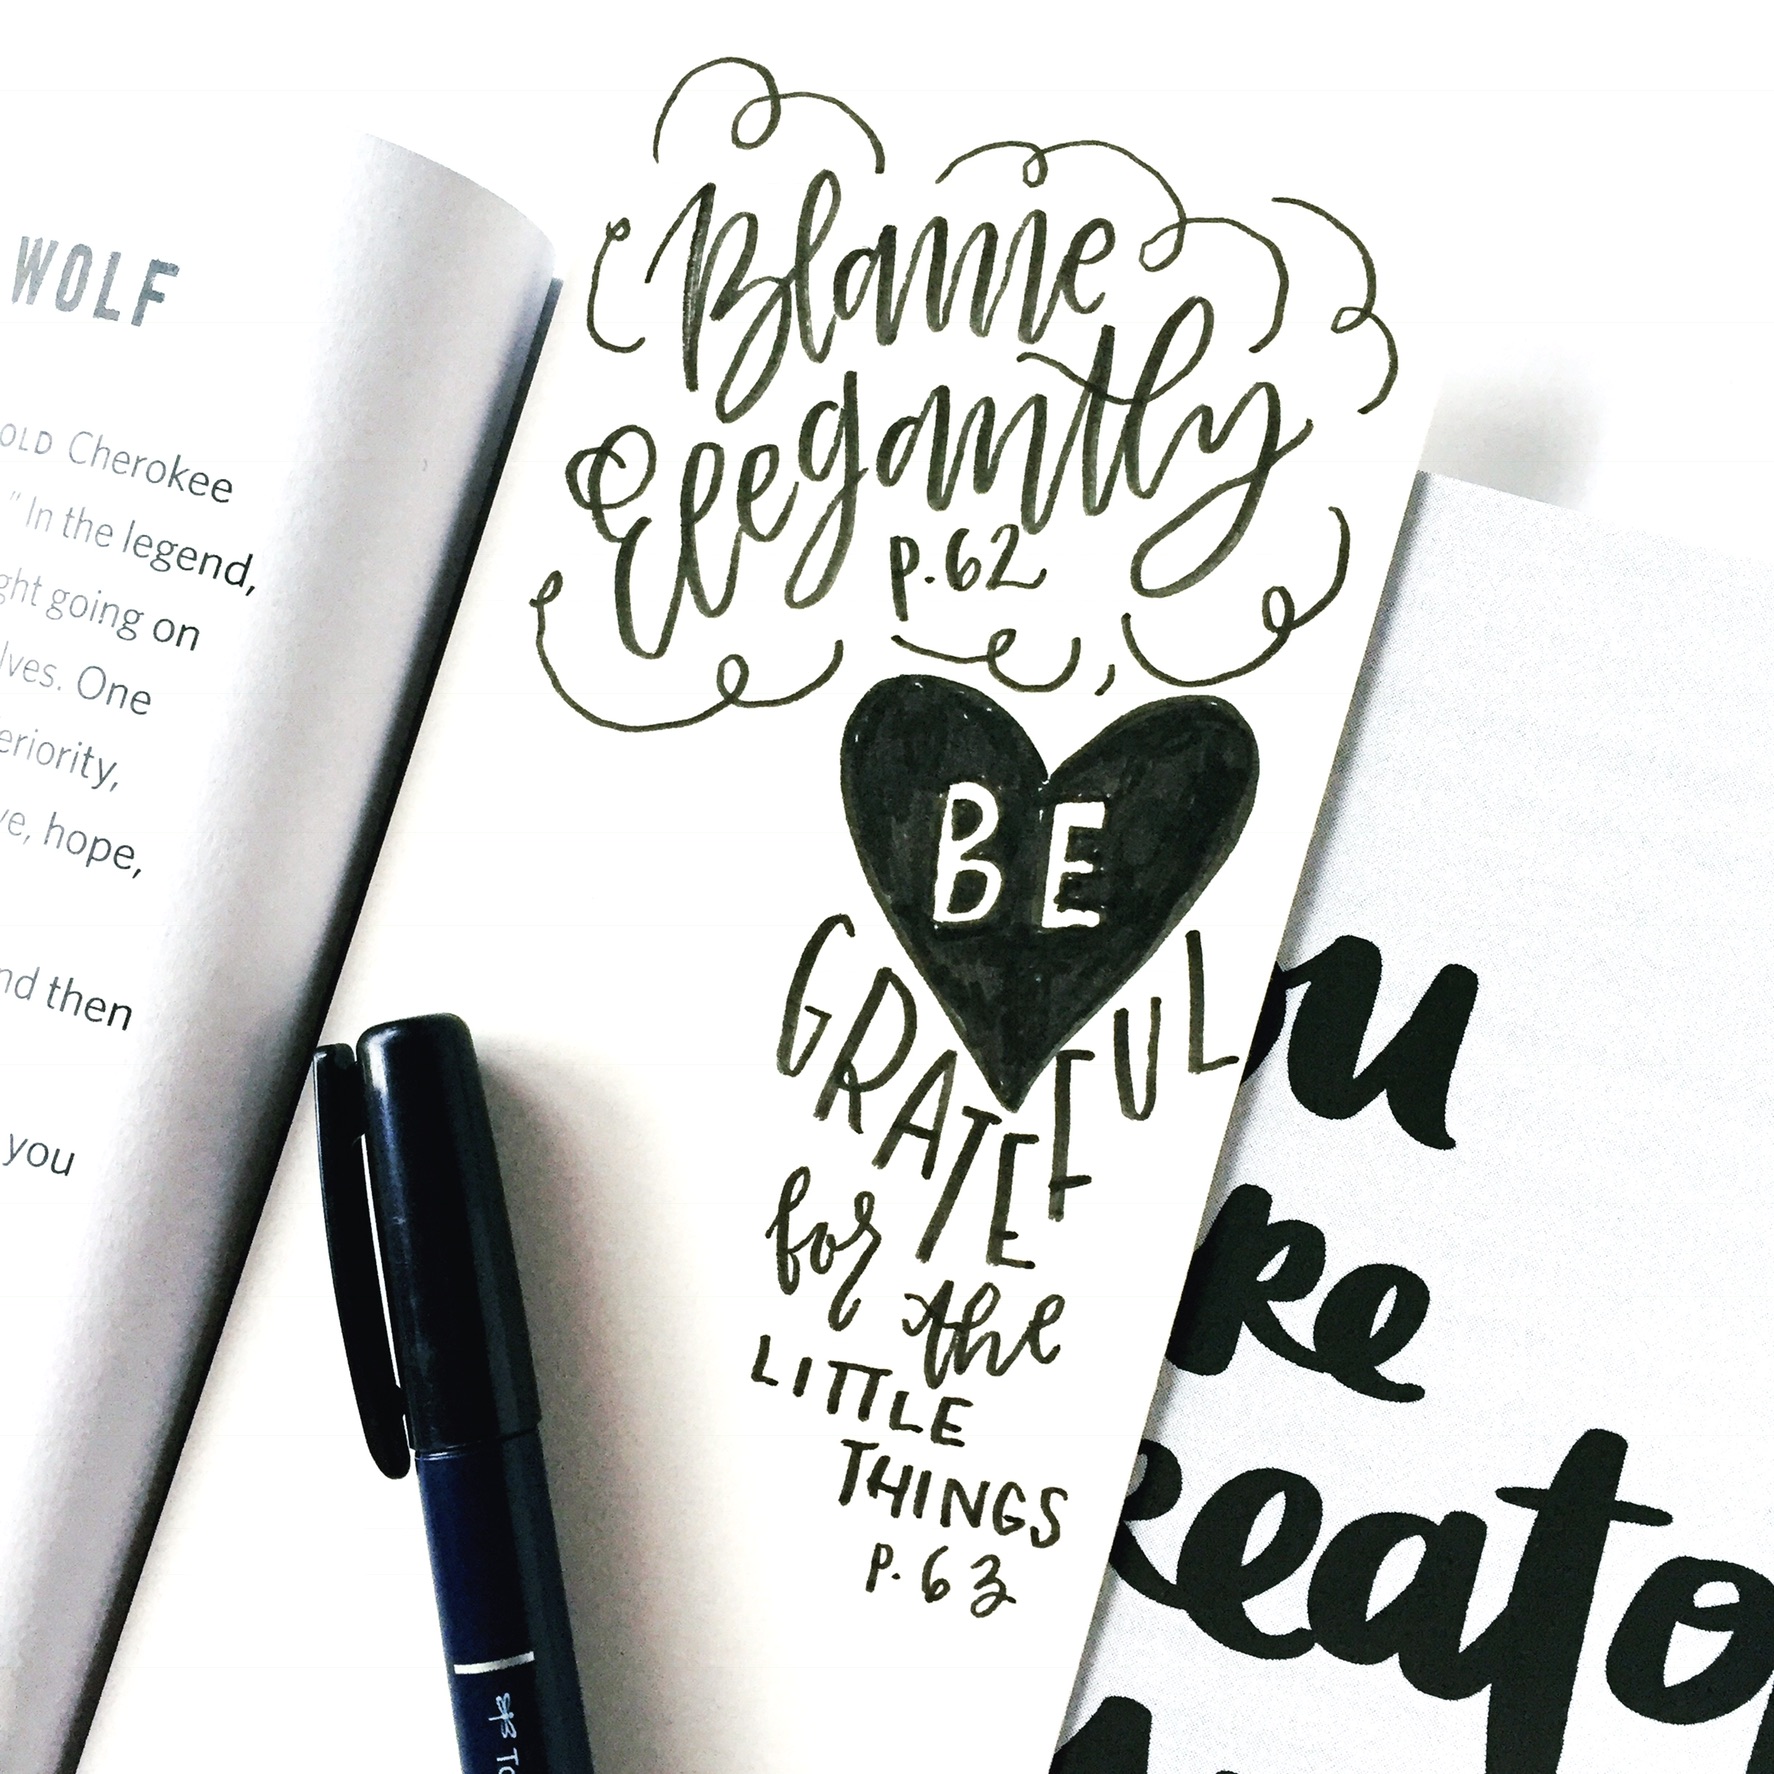 Lauren Fitzmaurice of @renmadecalligraphy on instagram and renmadecalligraphy.com shows you 3 ways to practice lettering while you read using products from tombowusa.com. For more lettering tips check out blog.tombowusa.com. Happy Lettering!